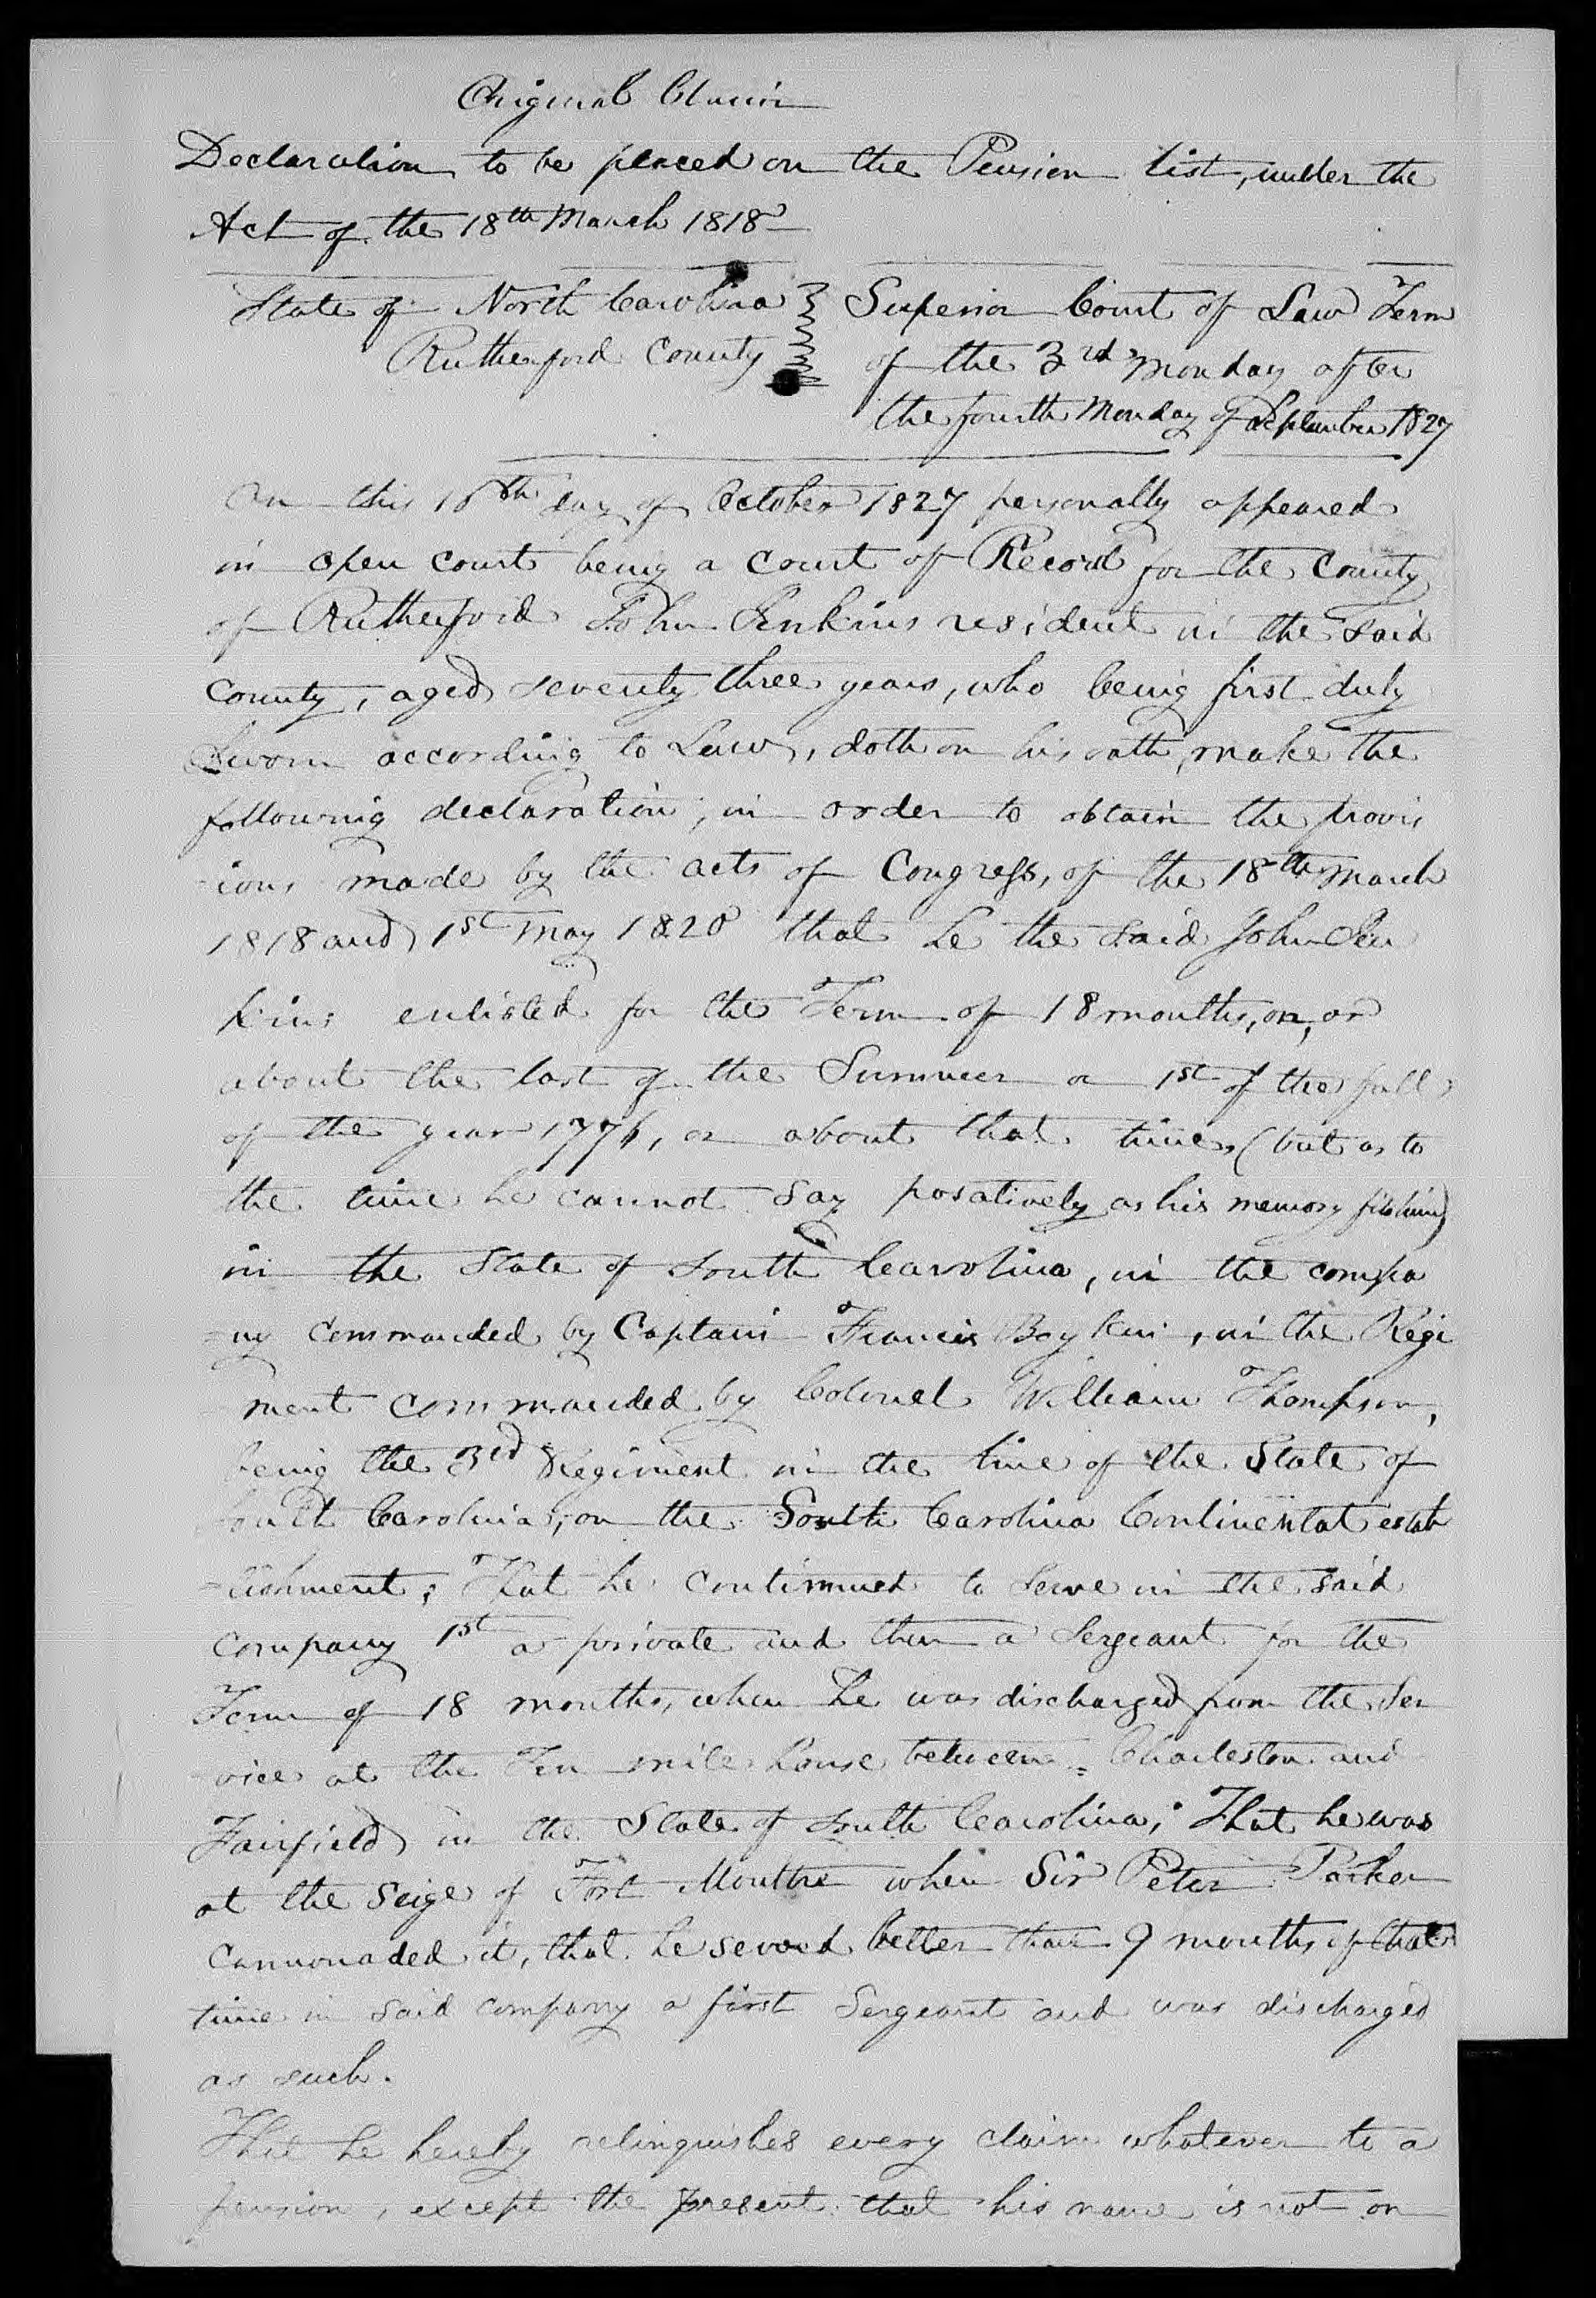 Application for a Veteran's Pension from John Jenkins, 18 October 1827, page 1